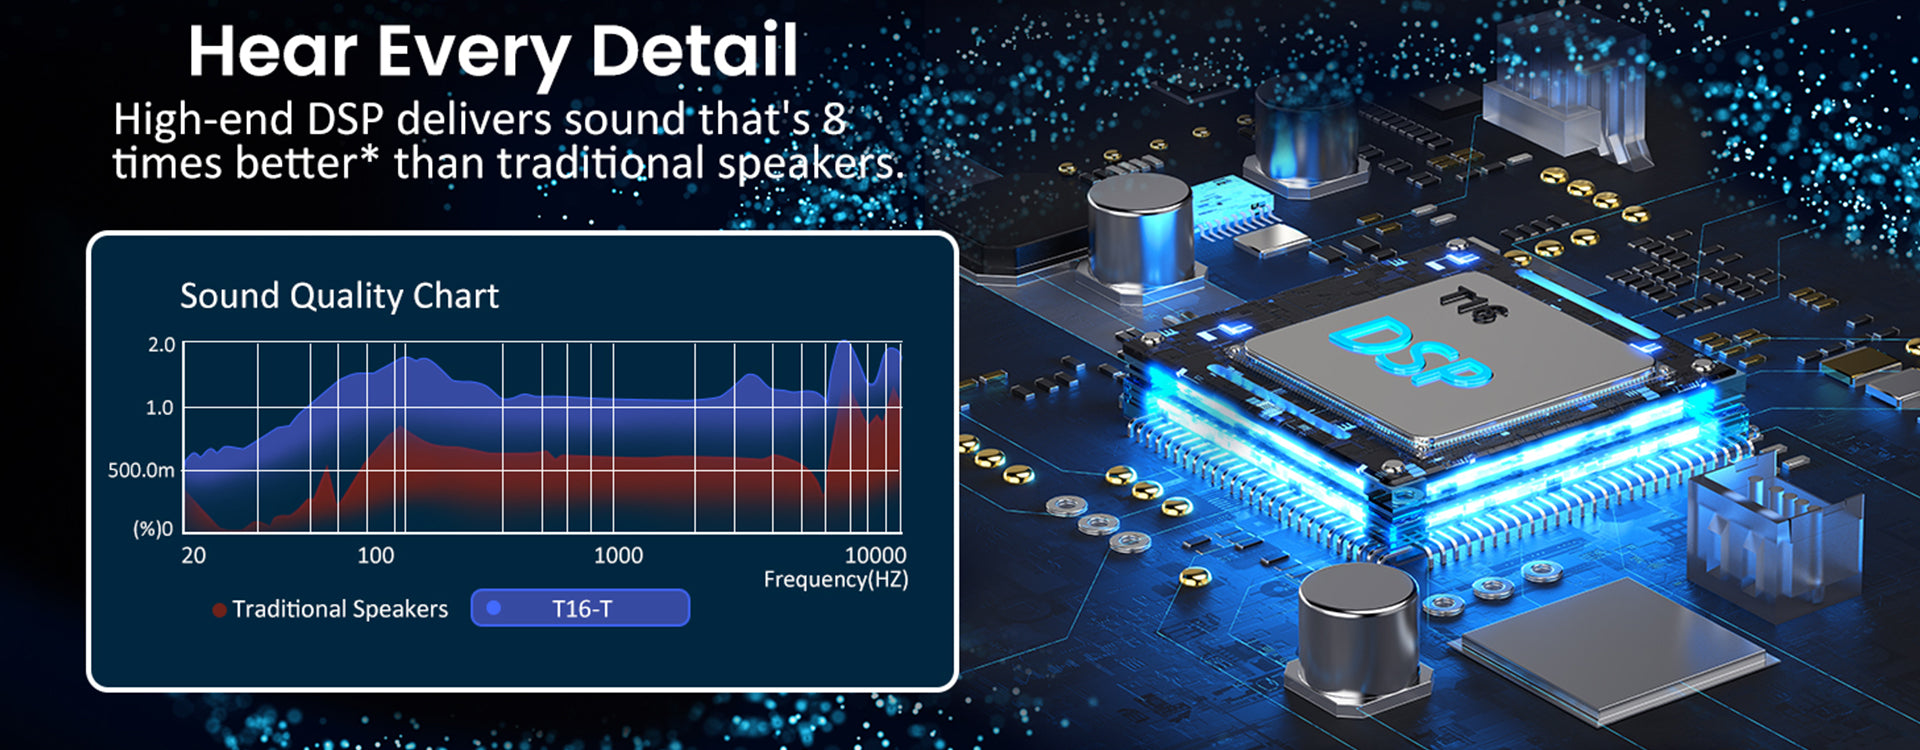 High-end DSP delivers sound that's 8 times better than traditional speakers, allowing you to hear every detail.